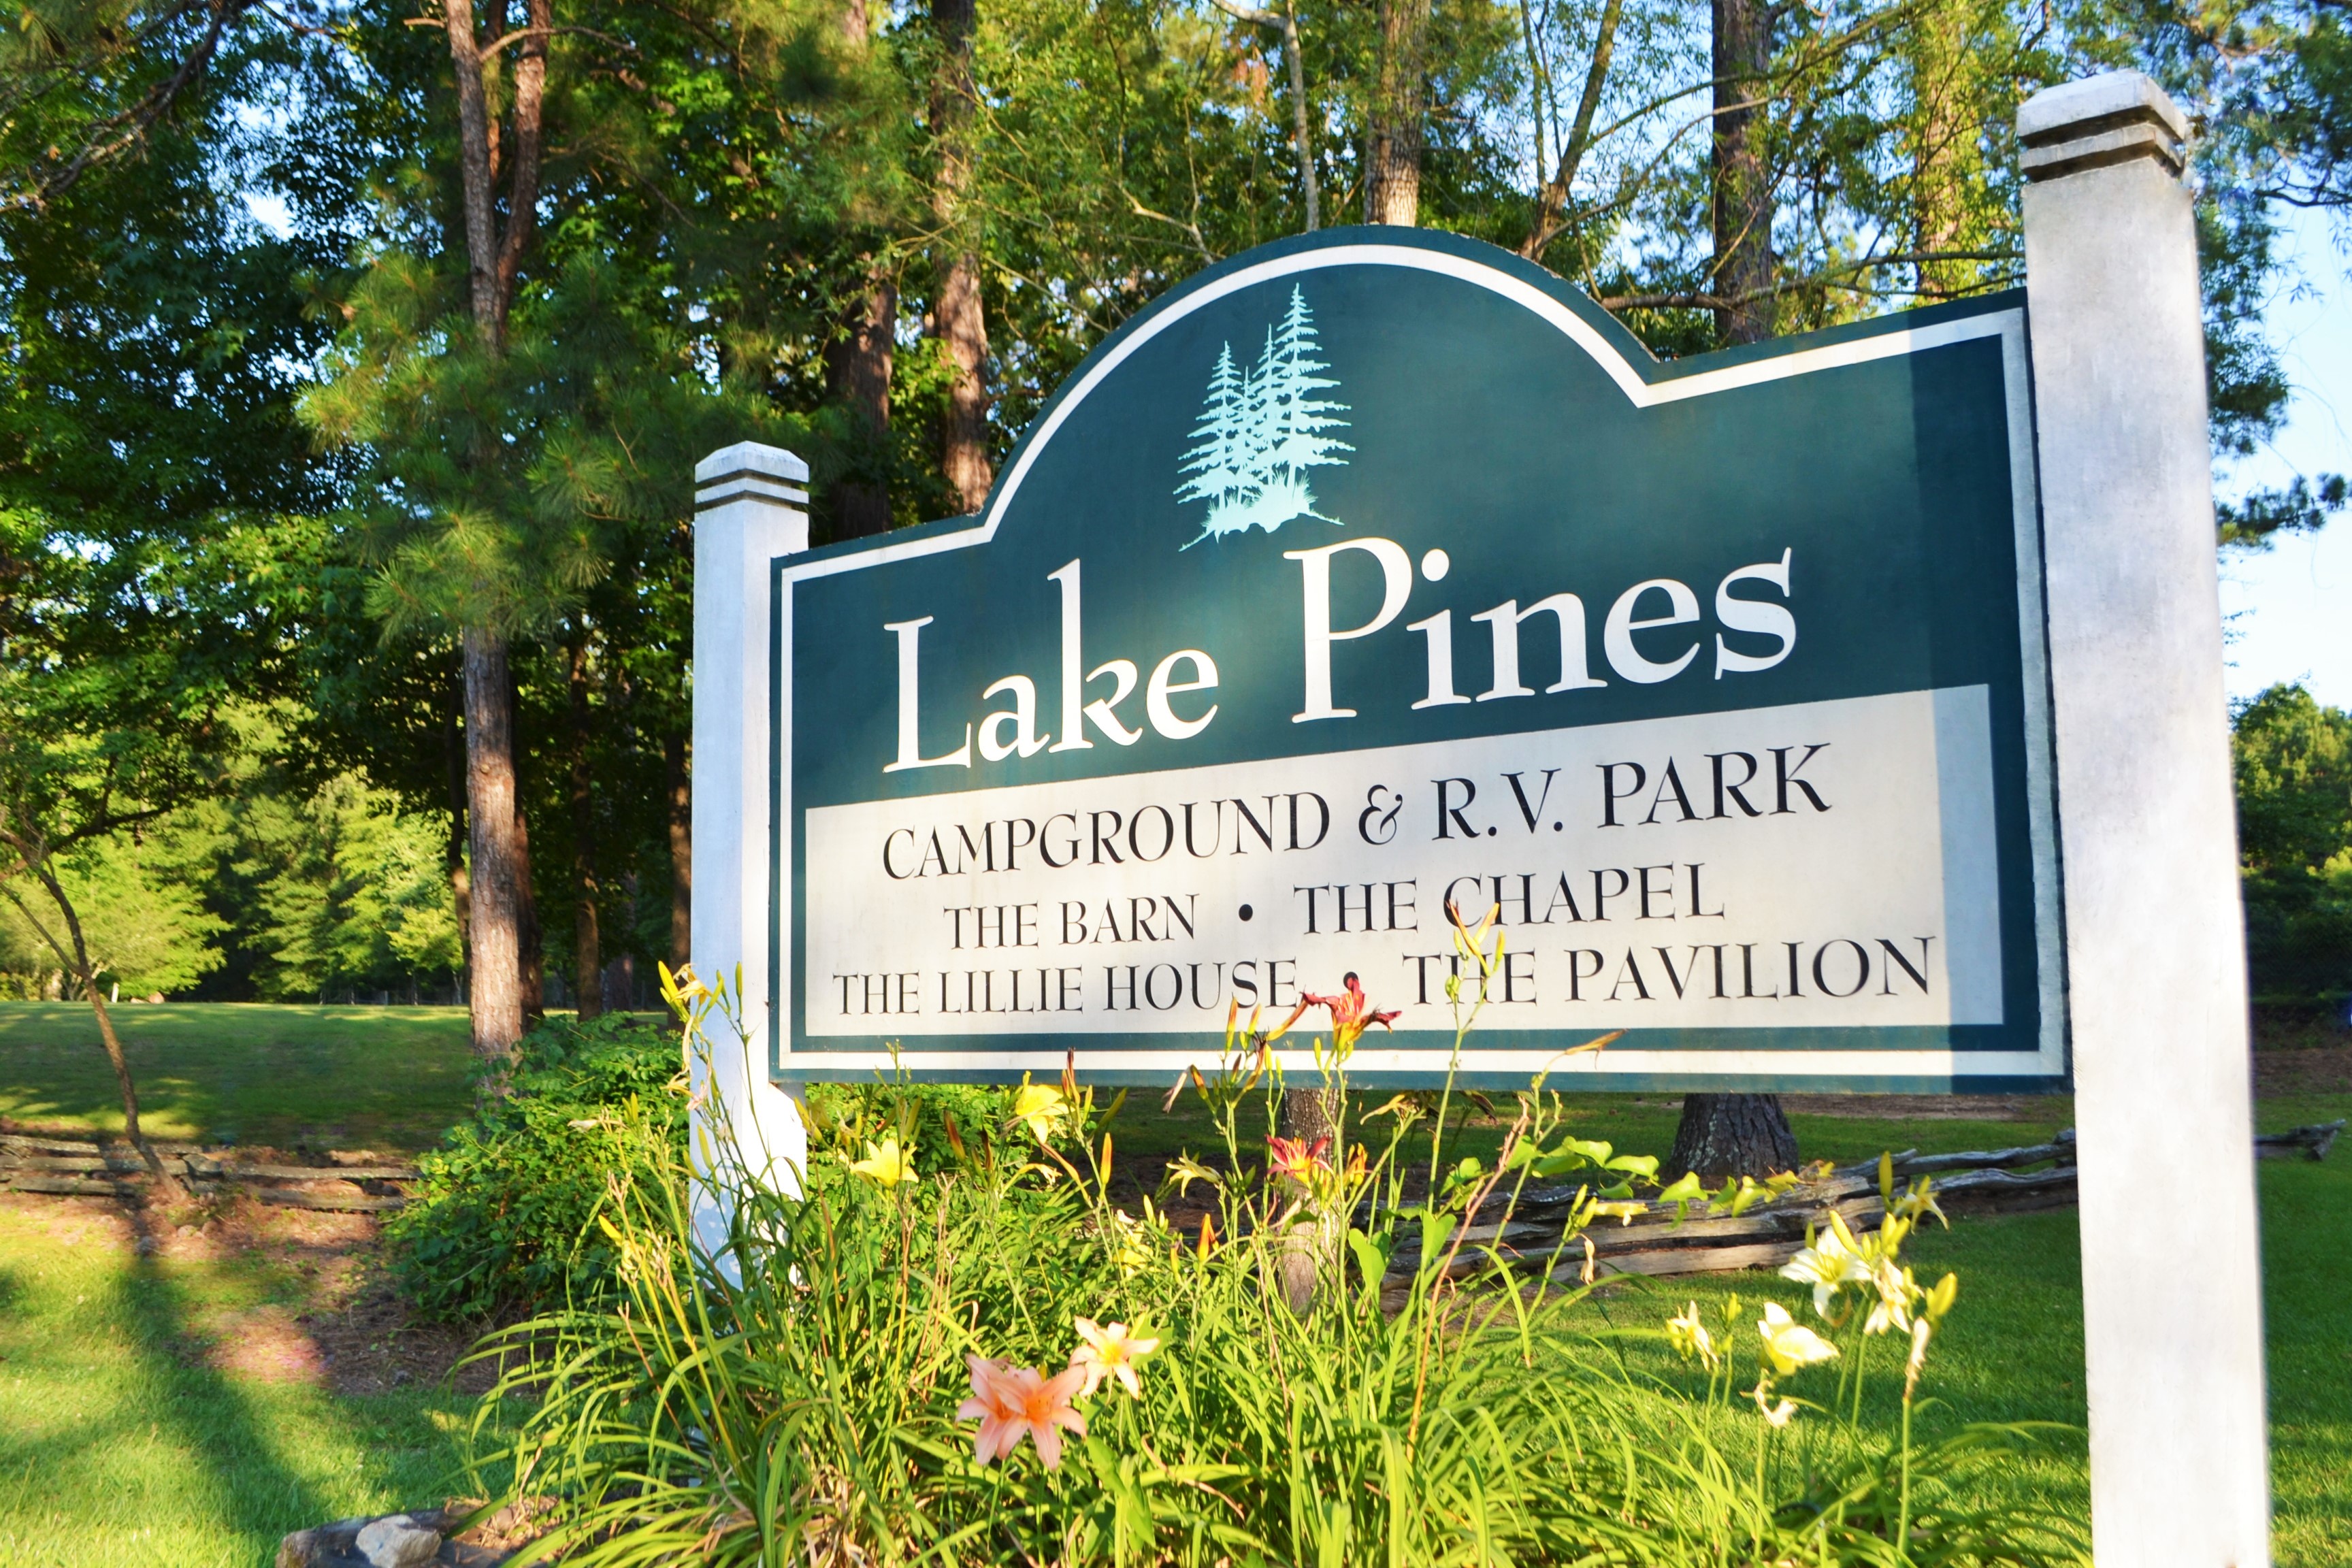 Lake Pines Campground and RV Park - sign